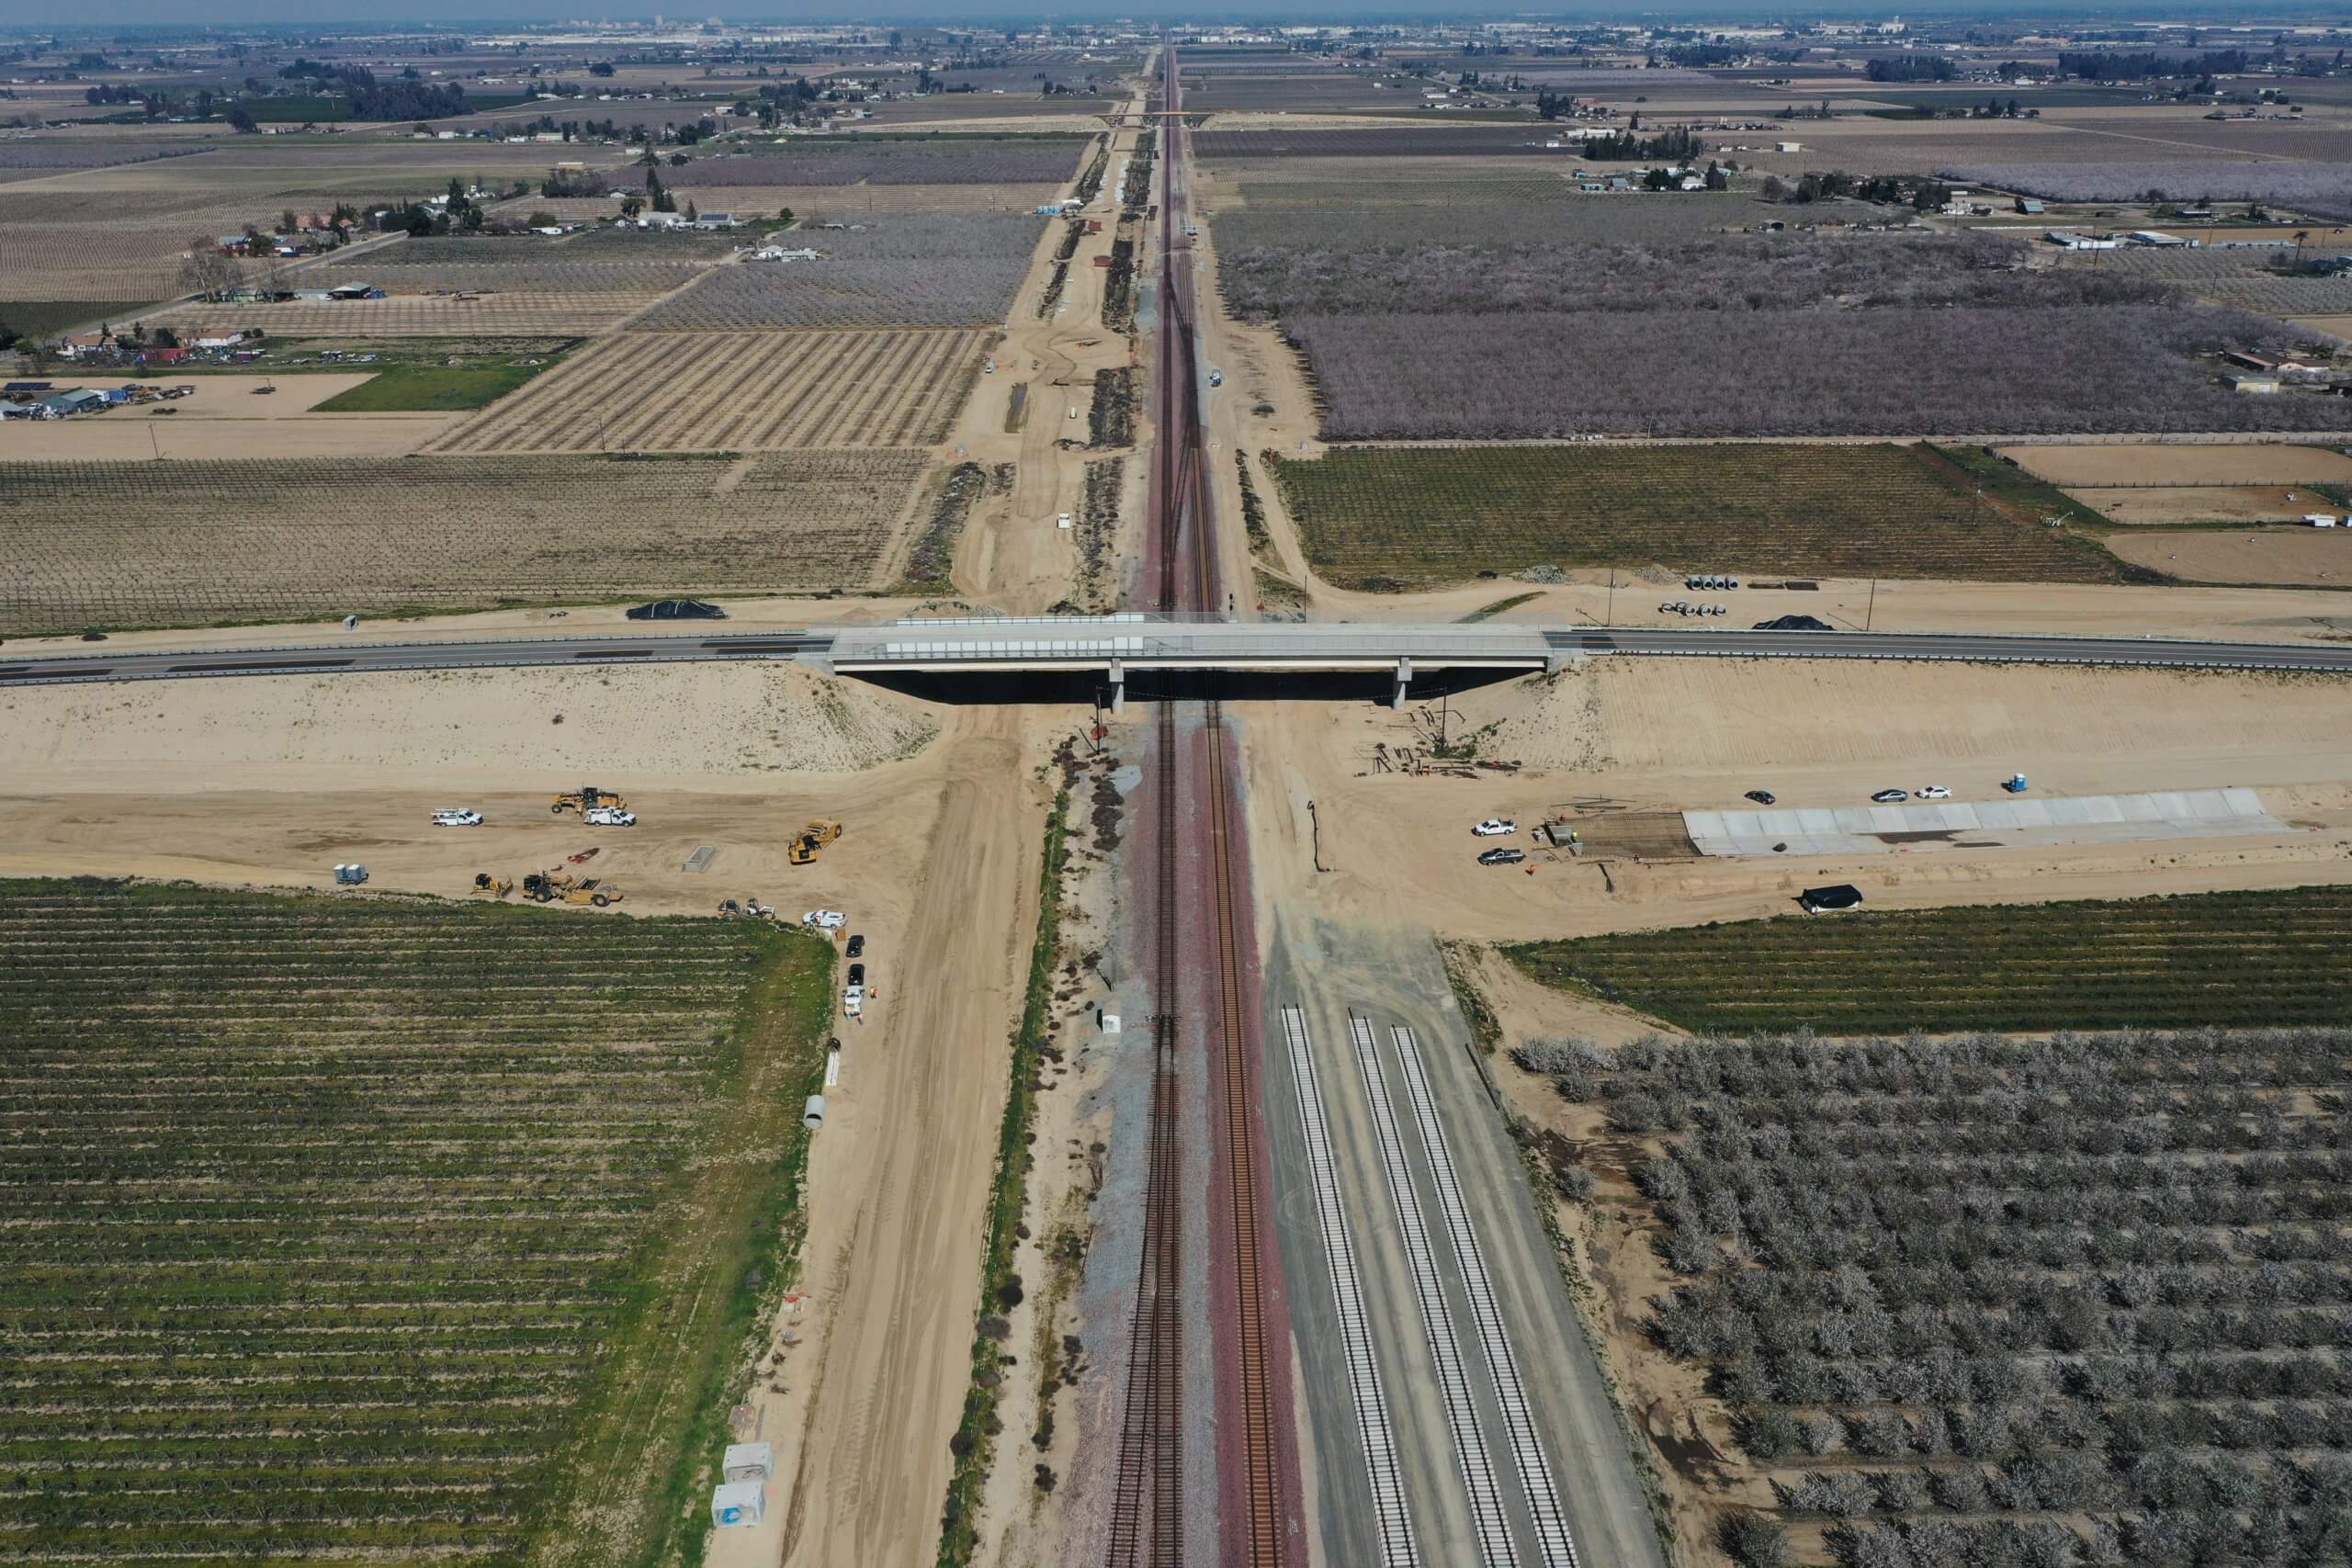 An image of the South Avenue Grade Separation in the middle, which shows the structure from the air and orchards all around, with the freight railroad tracks below heading straigh off to the horizon, beside where HSR tracks will eventually be laid, with the road crossing on the structure, rising on earthen berms to either side.